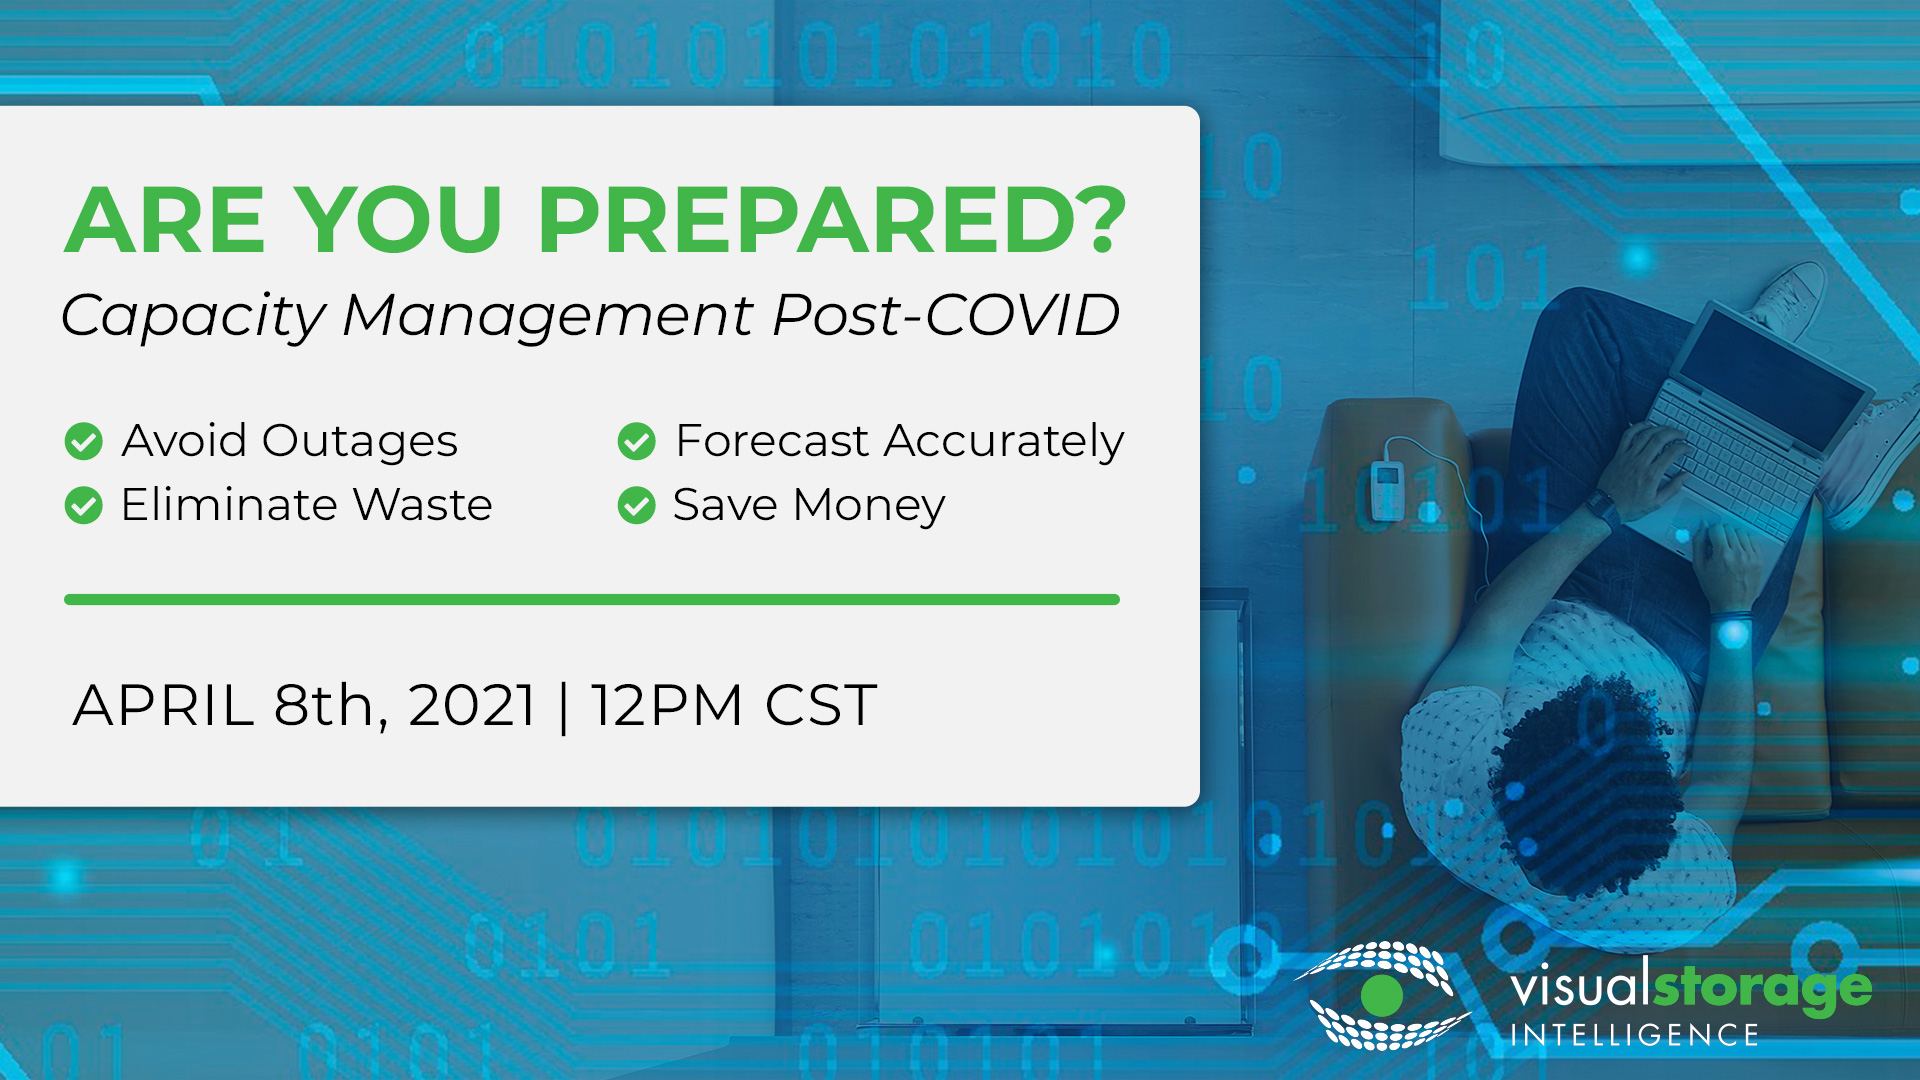 Promotional event photo. Headline reads "Are you prepared? Capacity management post-COVID"; an array of 4 items with check marks next to them read "Avoid outages, forecast accurately, eliminate waste, save money"; bottom says "April 8th, 2021 12PM CST"